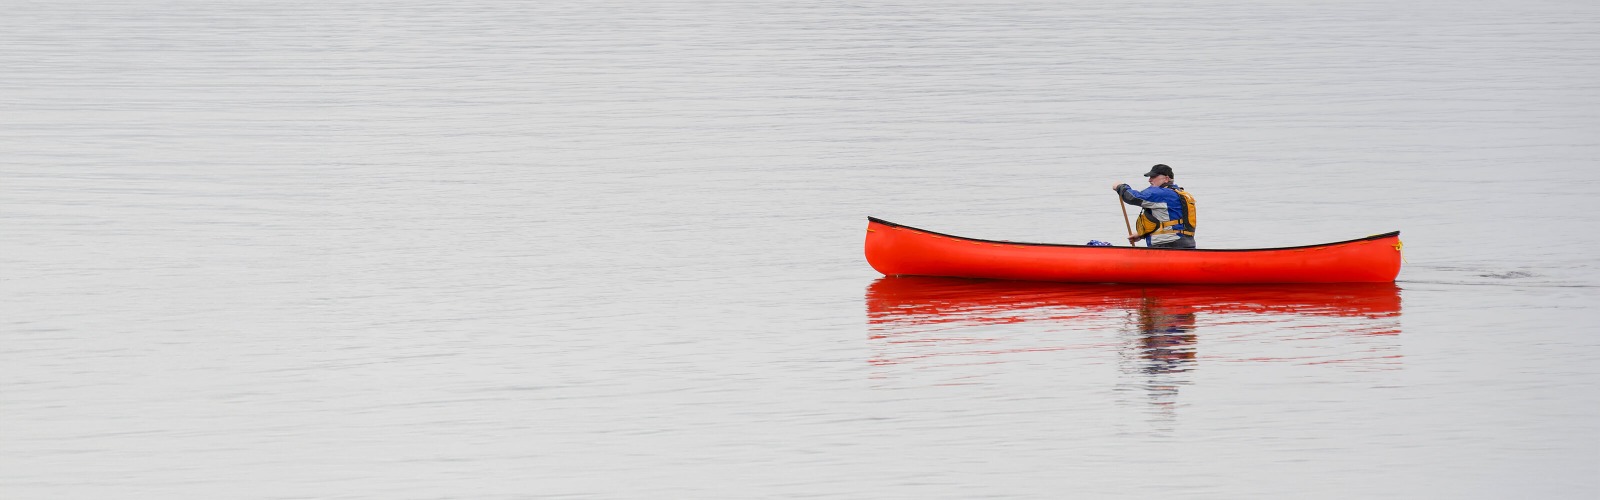 man in a red canoe on a body of water